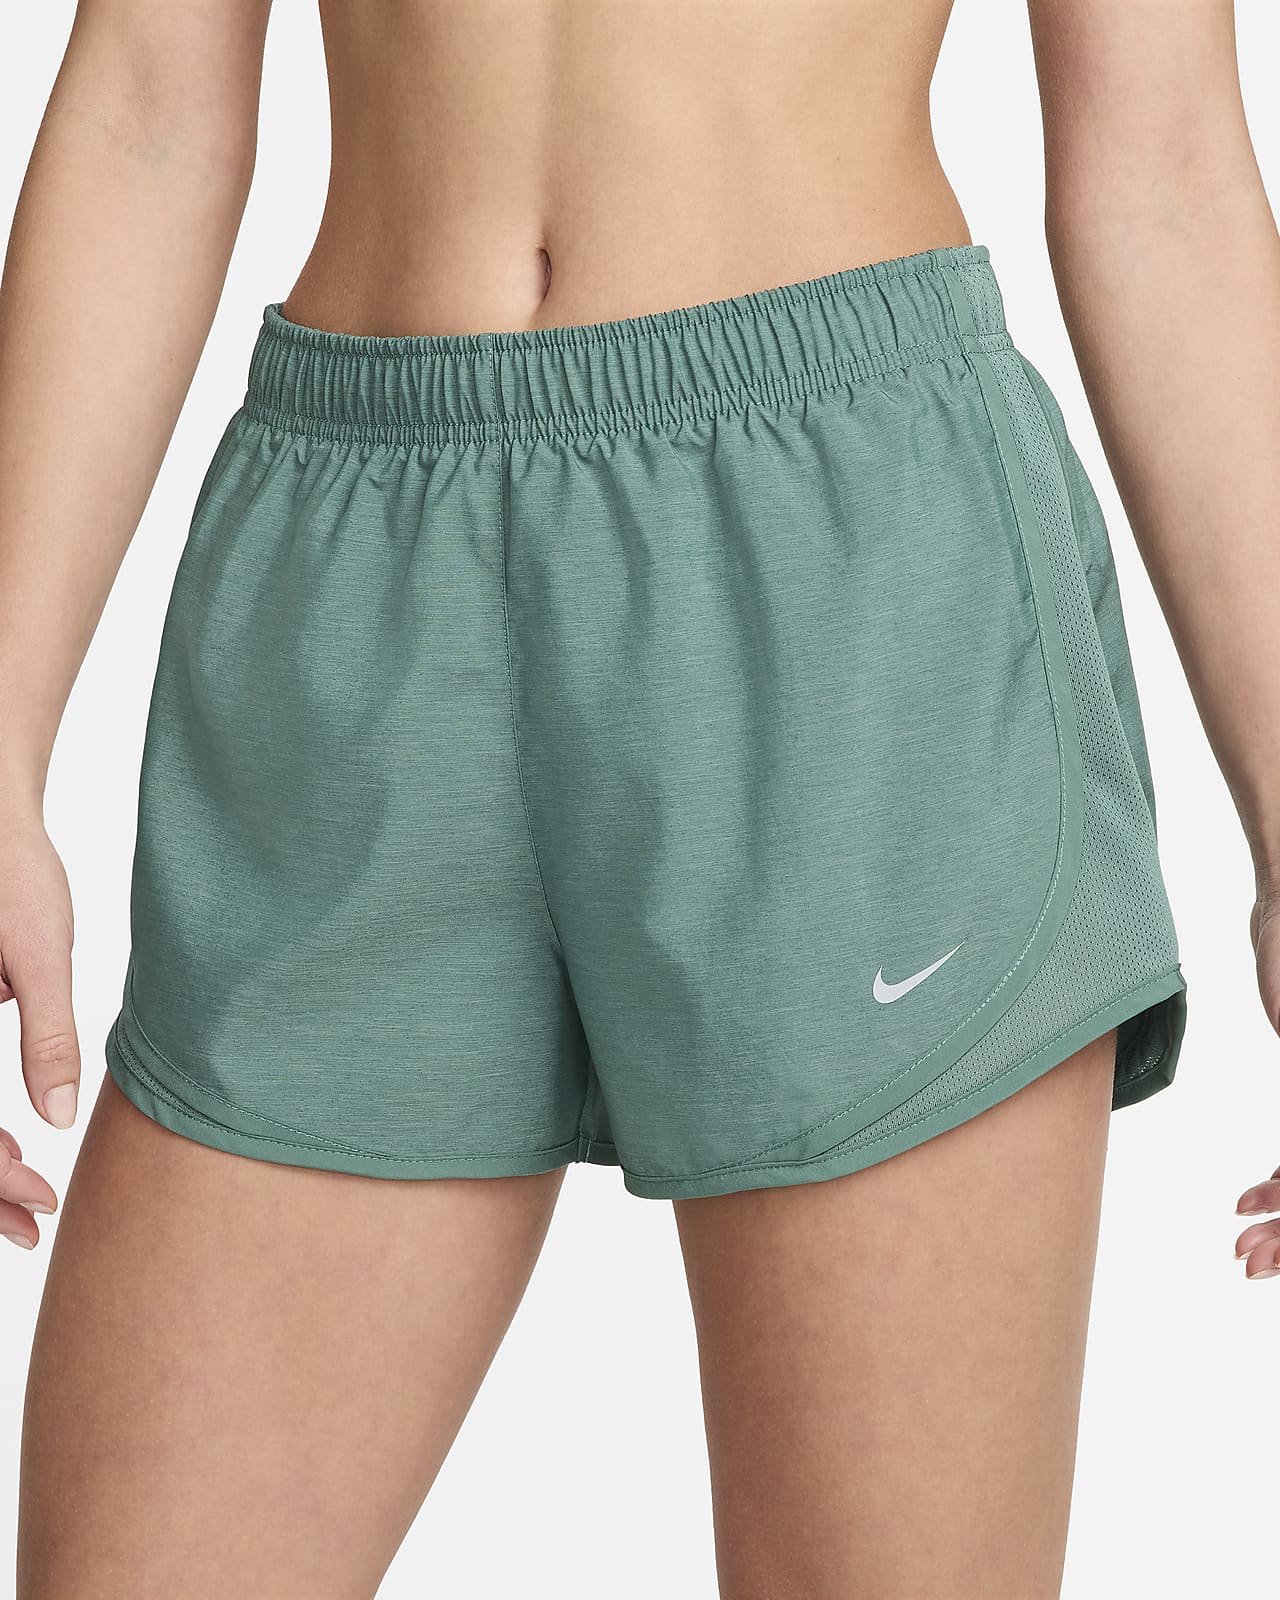 Nike Women's Dry Tempo Running Shorts - Wave One Sports